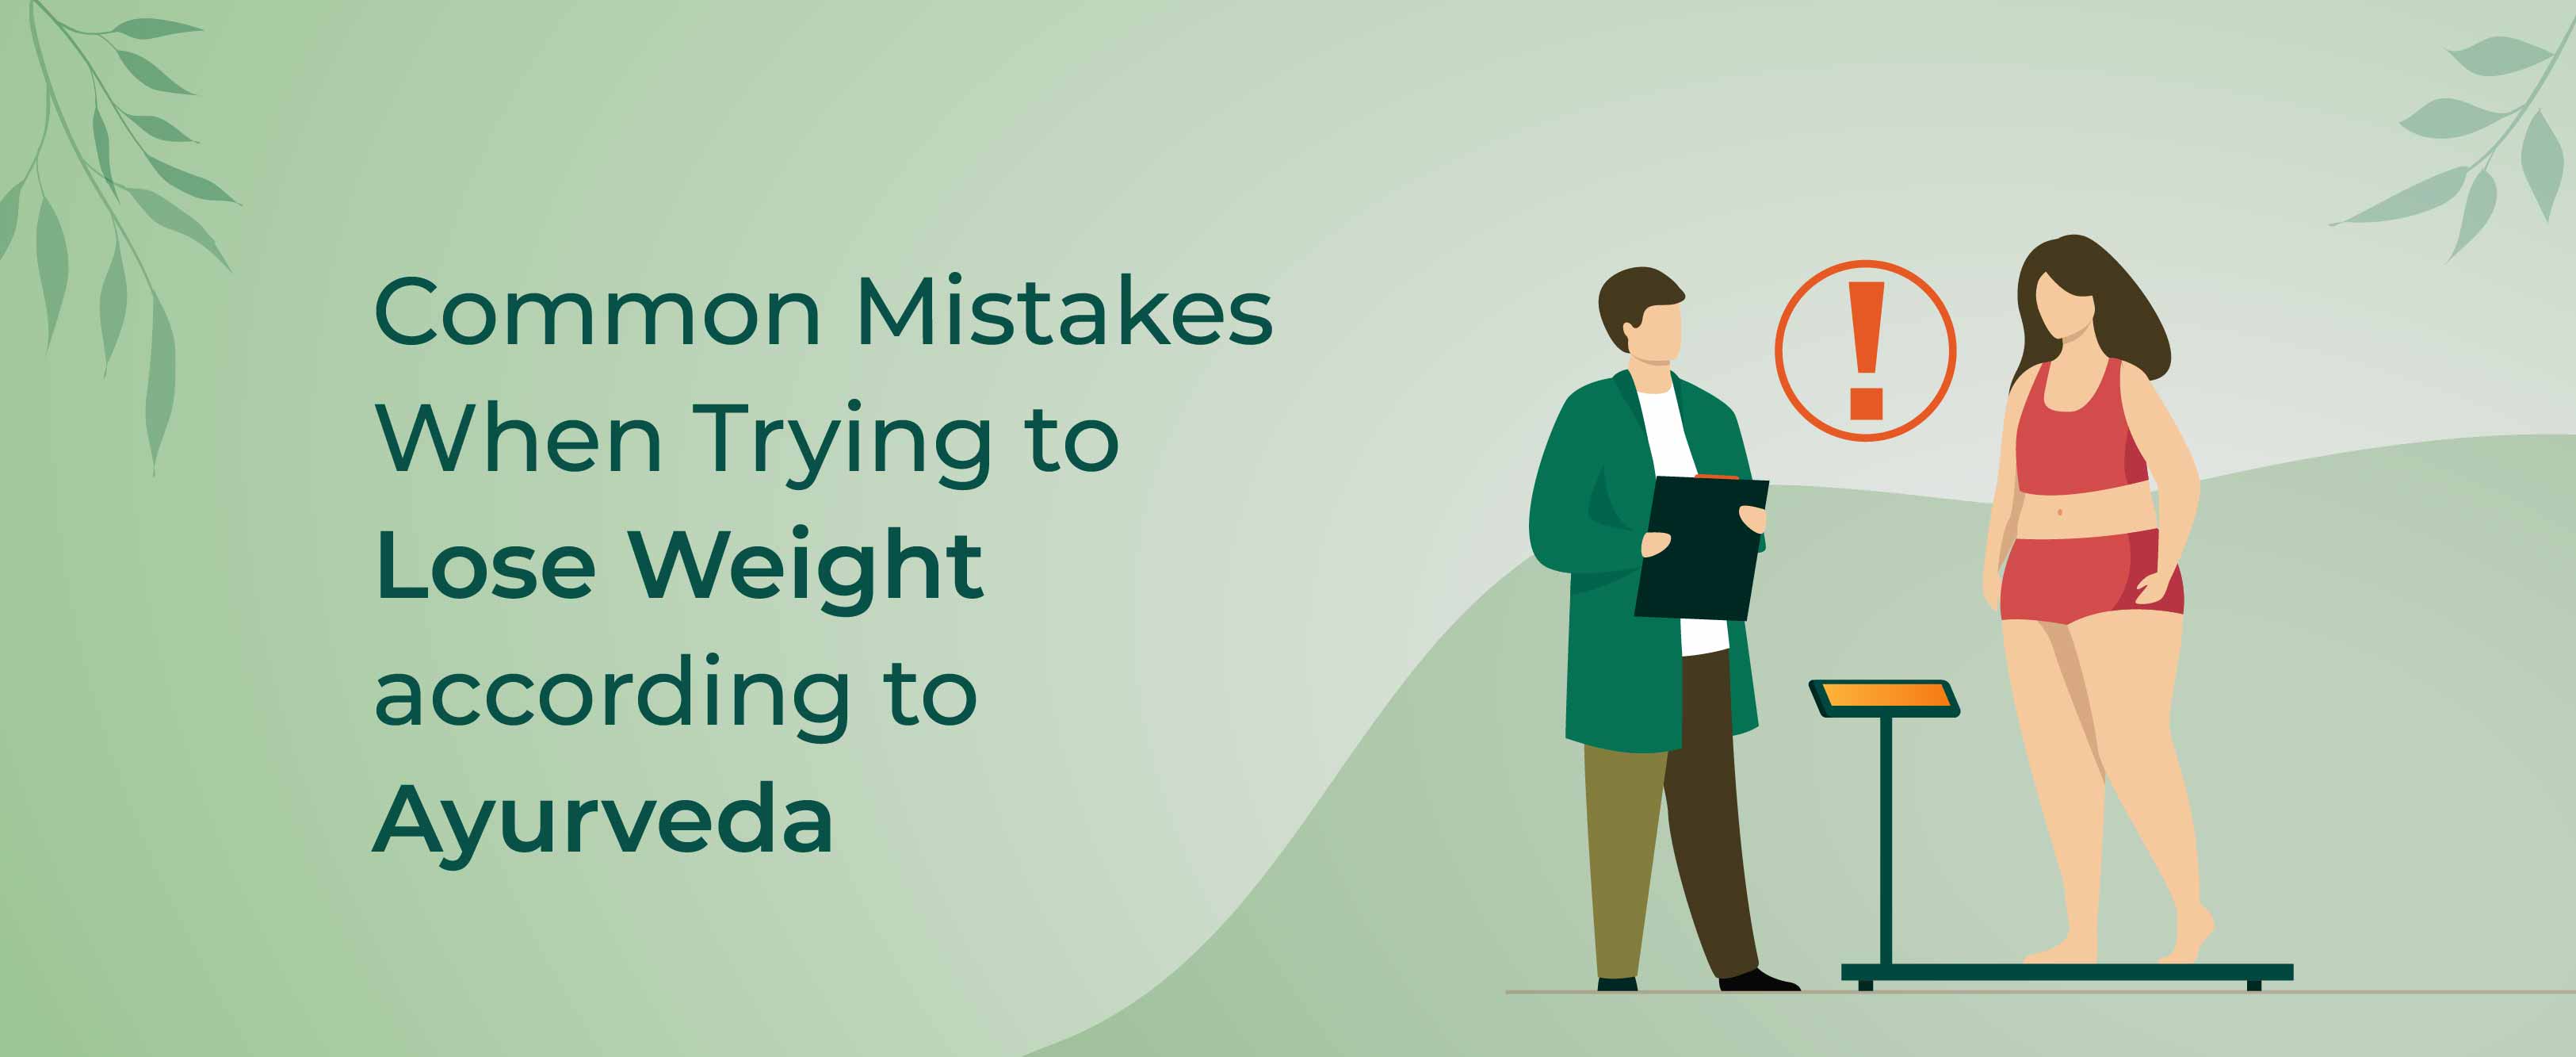 Common_Mistakes_When_Trying_to_Lose_Weight_according_to_Ayurveda_banner.jpg